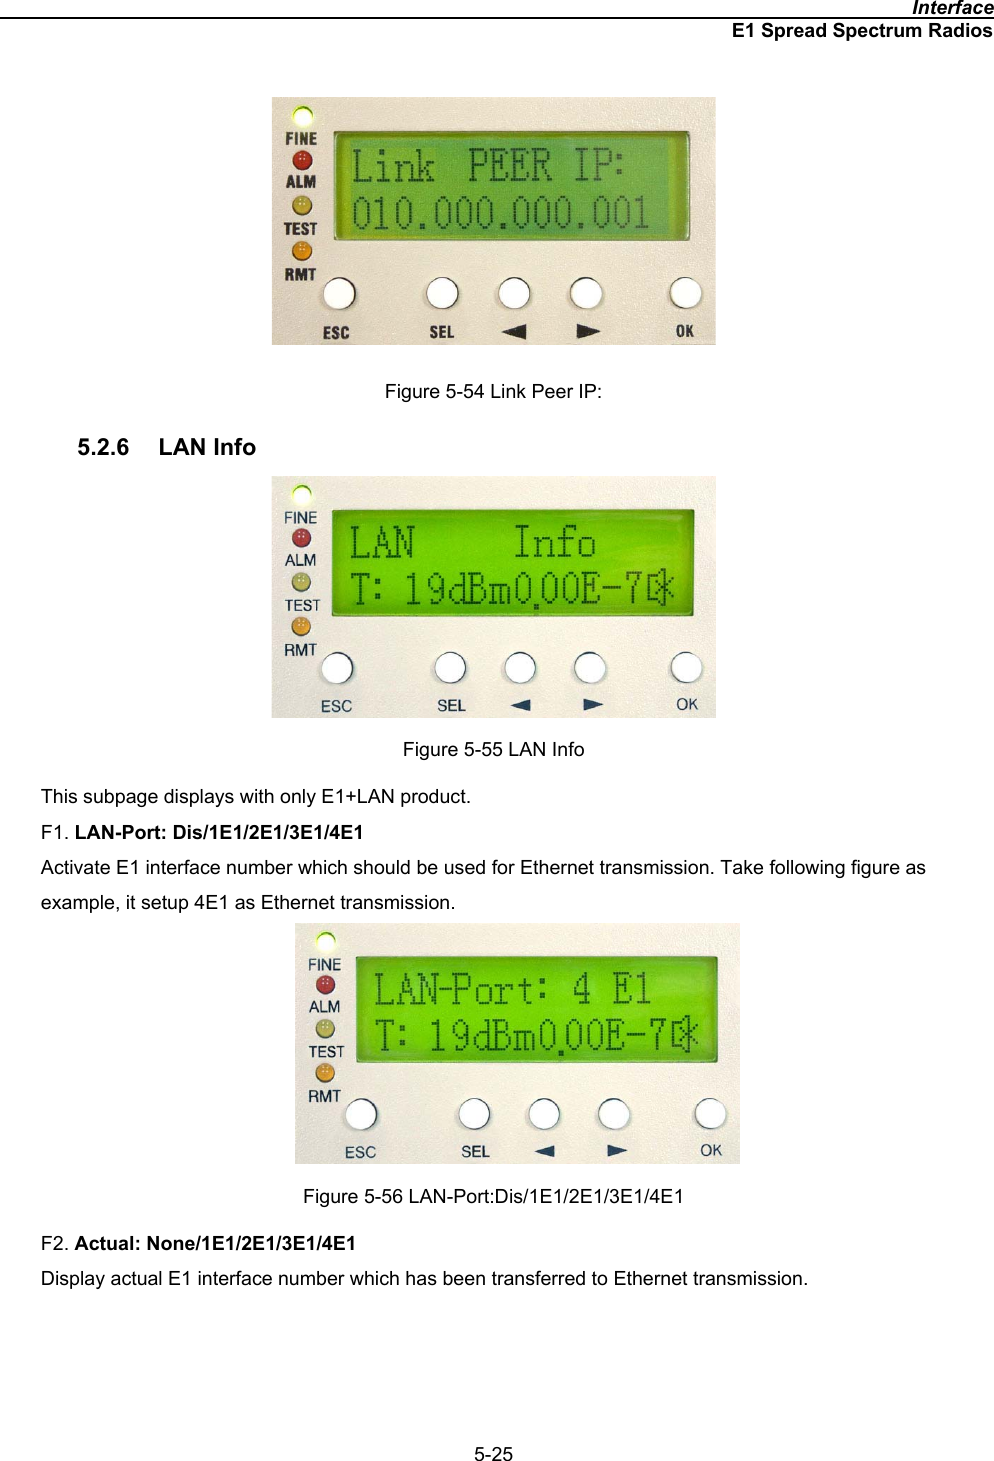                                                                                              InterfaceE1 Spread Spectrum Radios5-25Figure 5-54 Link Peer IP: 5.2.6 LAN Info Figure 5-55 LAN Info This subpage displays with only E1+LAN product. F1. LAN-Port: Dis/1E1/2E1/3E1/4E1Activate E1 interface number which should be used for Ethernet transmission. Take following figure as example, it setup 4E1 as Ethernet transmission. Figure 5-56 LAN-Port:Dis/1E1/2E1/3E1/4E1 F2. Actual: None/1E1/2E1/3E1/4E1Display actual E1 interface number which has been transferred to Ethernet transmission. 